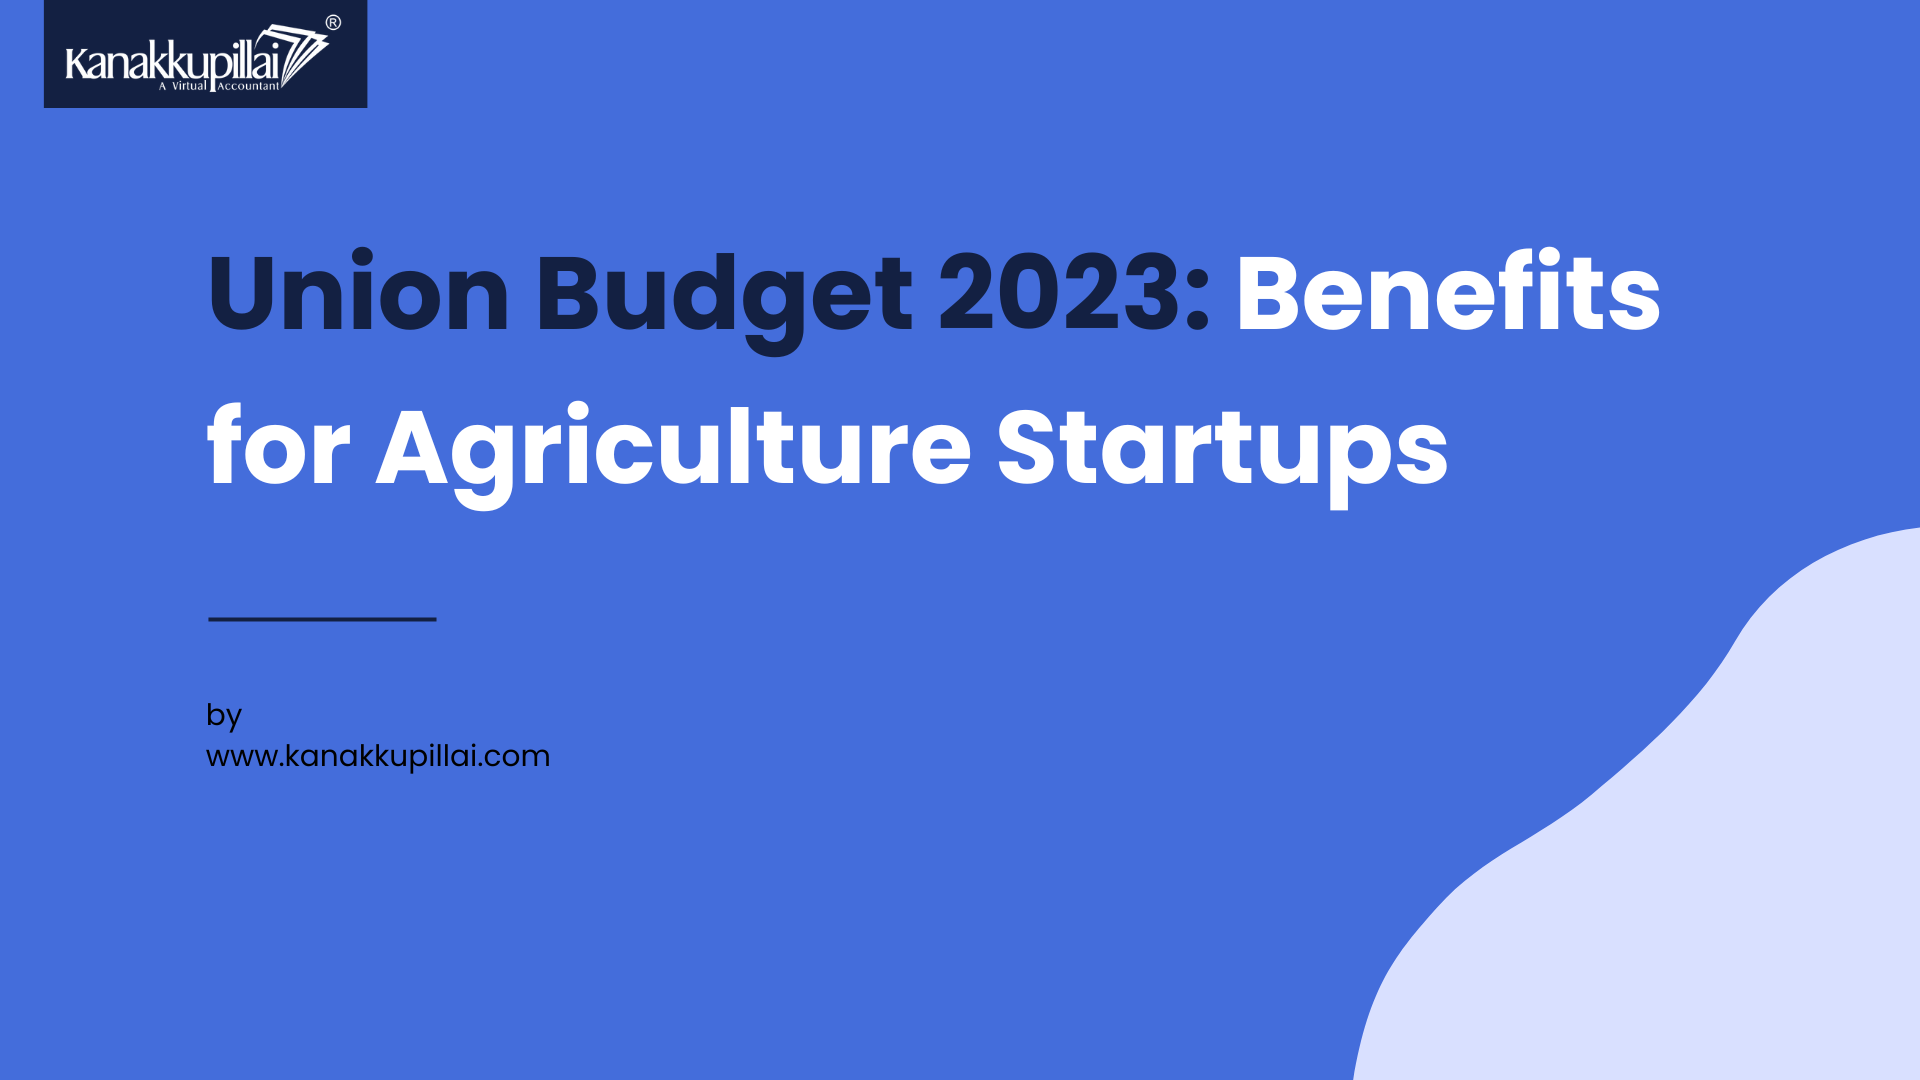 Union Budget 2023: Benefits for Agriculture Startups